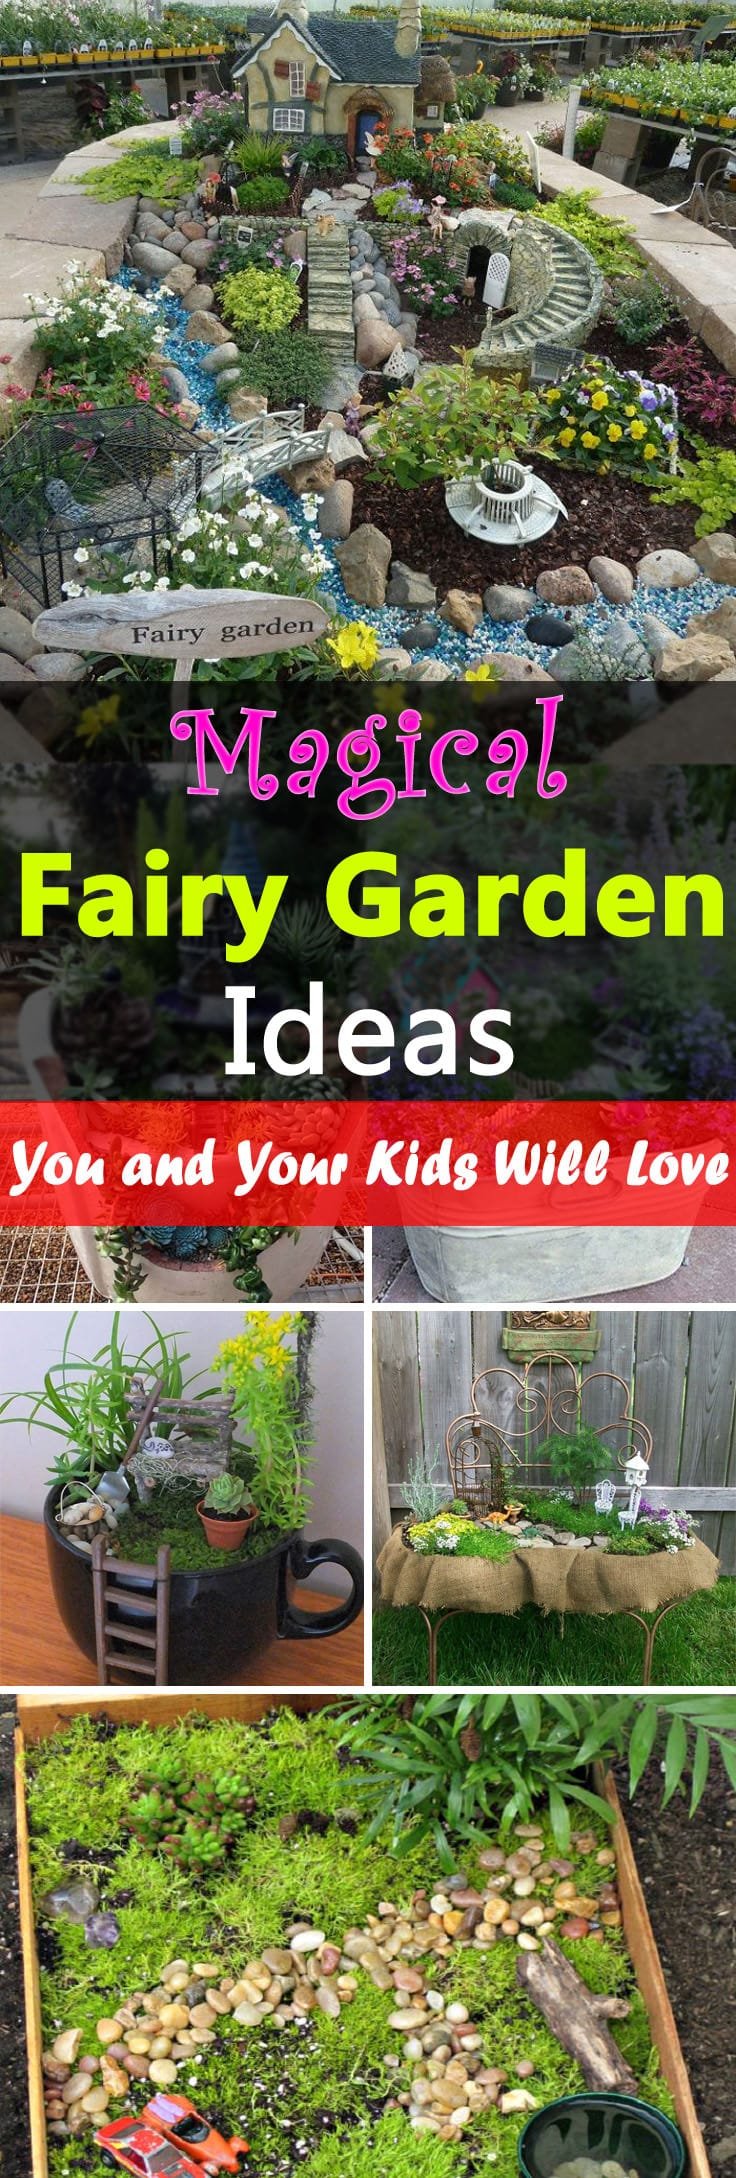 18 Magical Fairy Garden Ideas--The kids will love them, and you too. These cute looking fairy gardens are really amazing. They're inexpensive also and you can easily make them from unused, recycled materials.